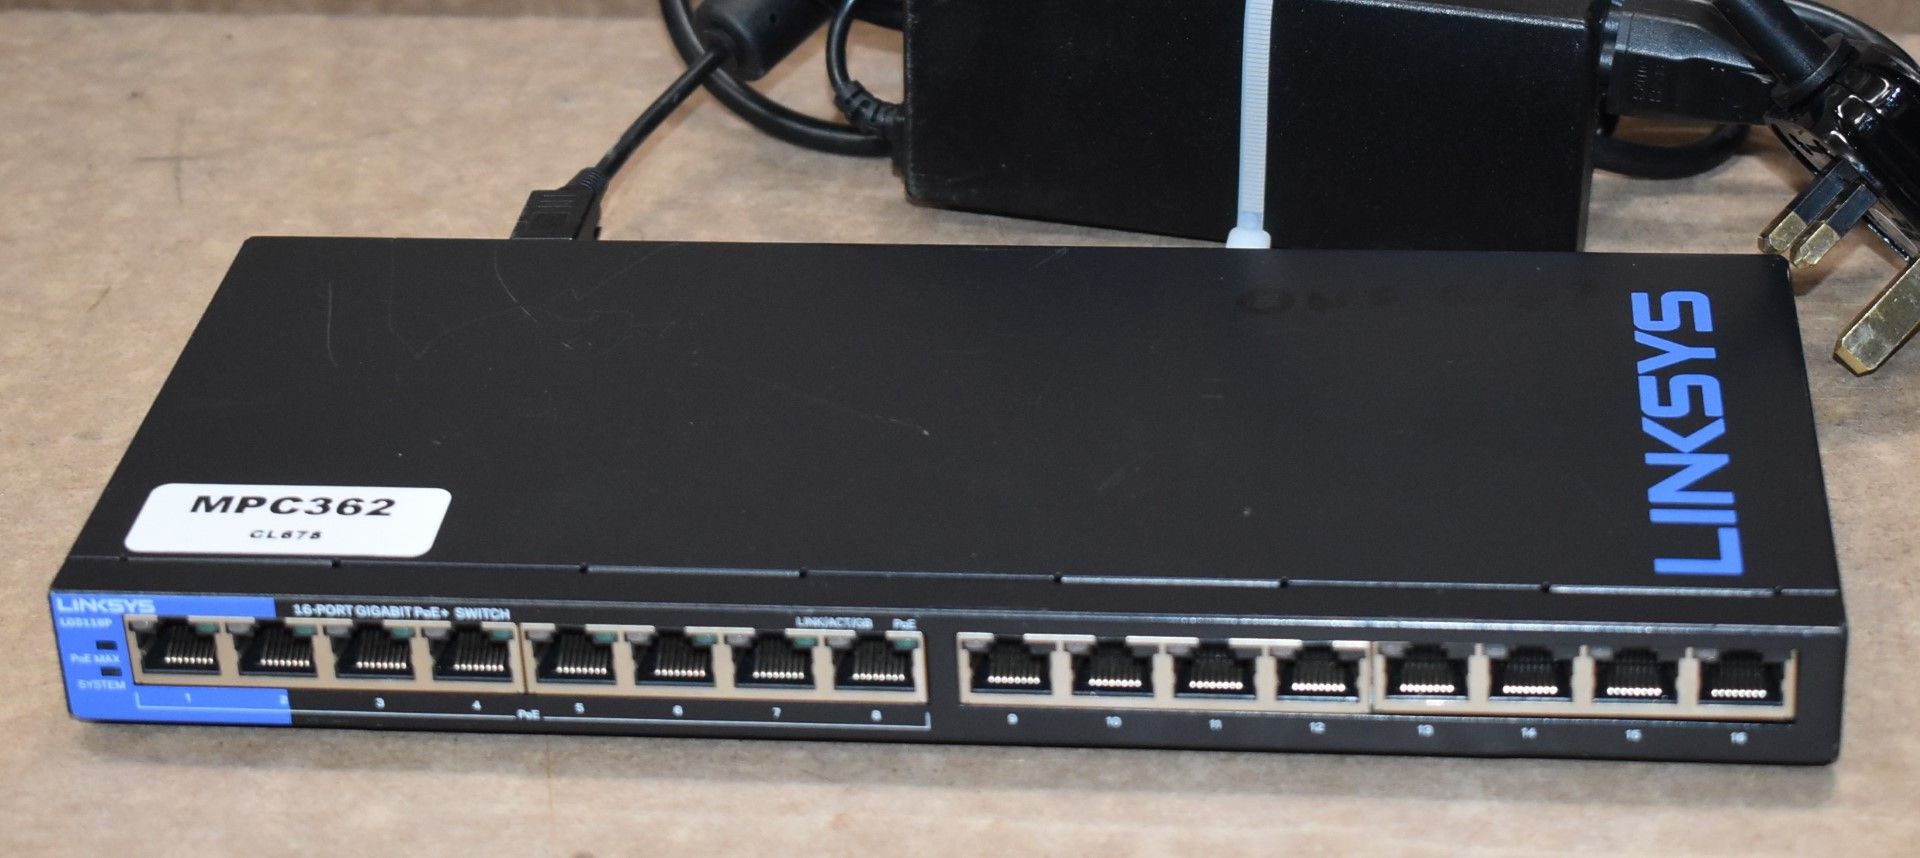 1 x Linksys LGS116P Business 16 Port Network Switch With 8 Po E+ Port - Includes Power Supply - Ref: - Image 2 of 5